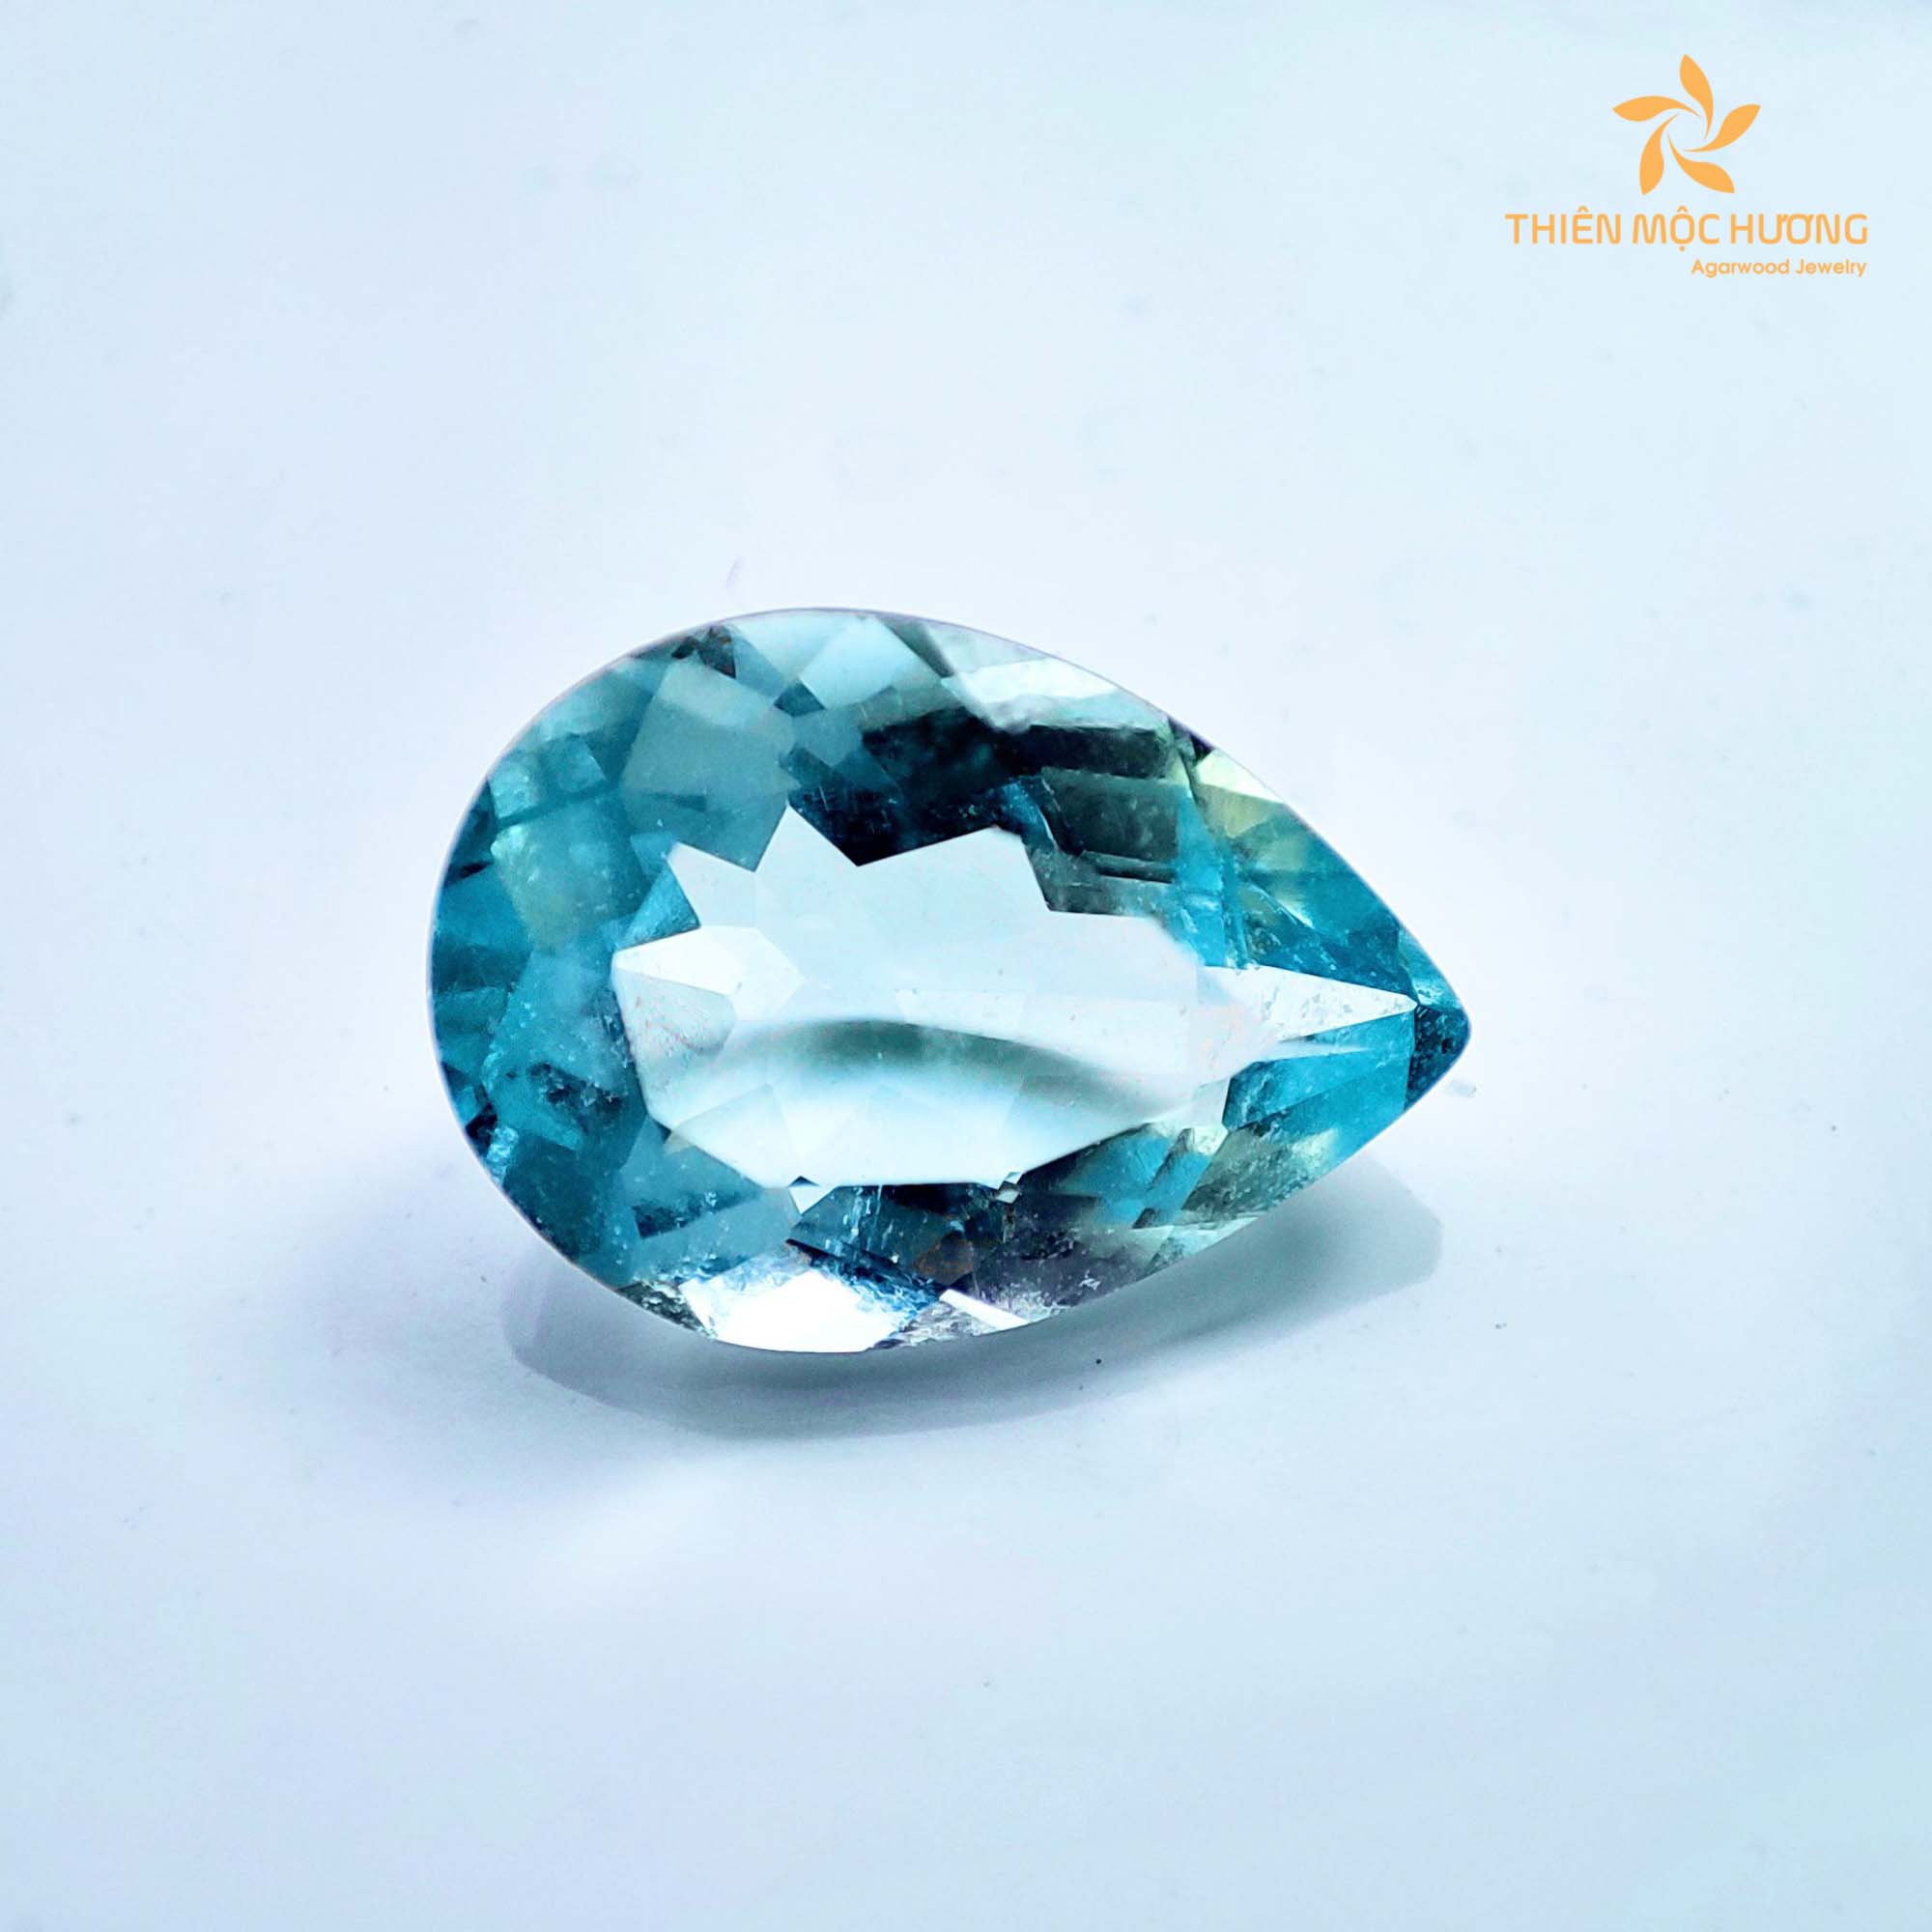 Why the price of Aquamarine is so expensive?